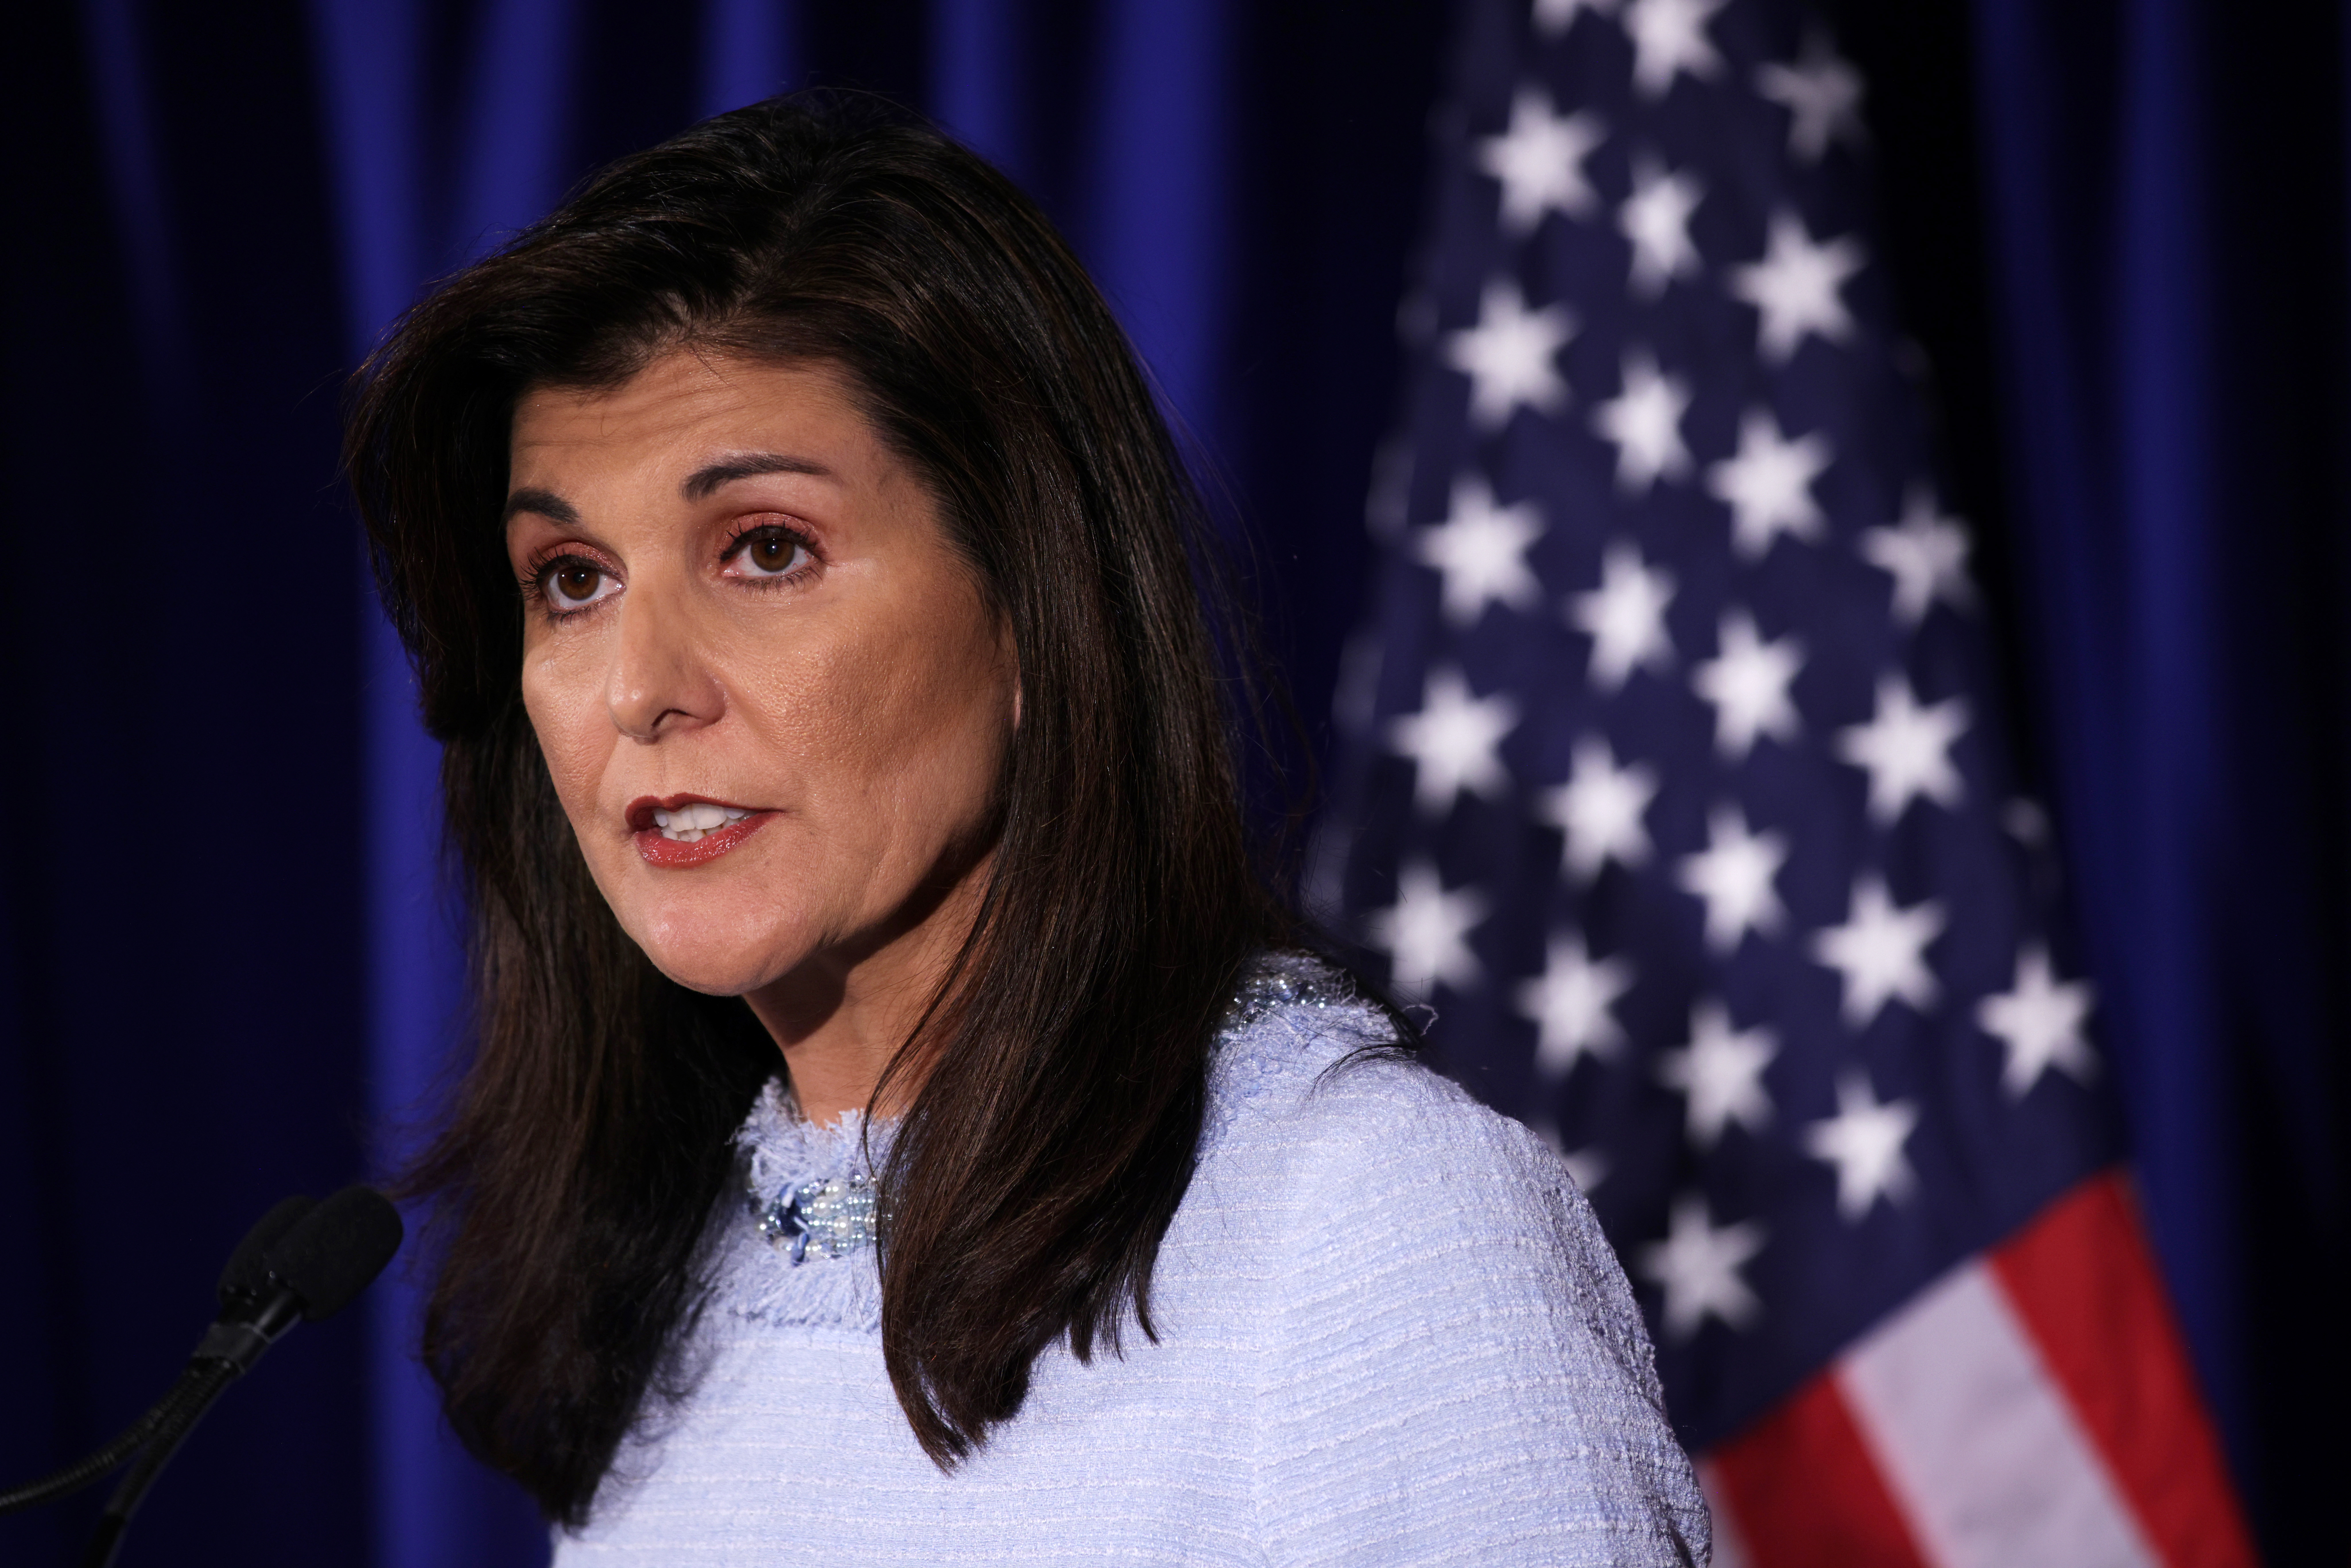 Nikki Haley, a woman in her 50s with long dark hair wearing a lavender dress, speaks with a serious expression. Behind her is a US flag against a blue backdrop.